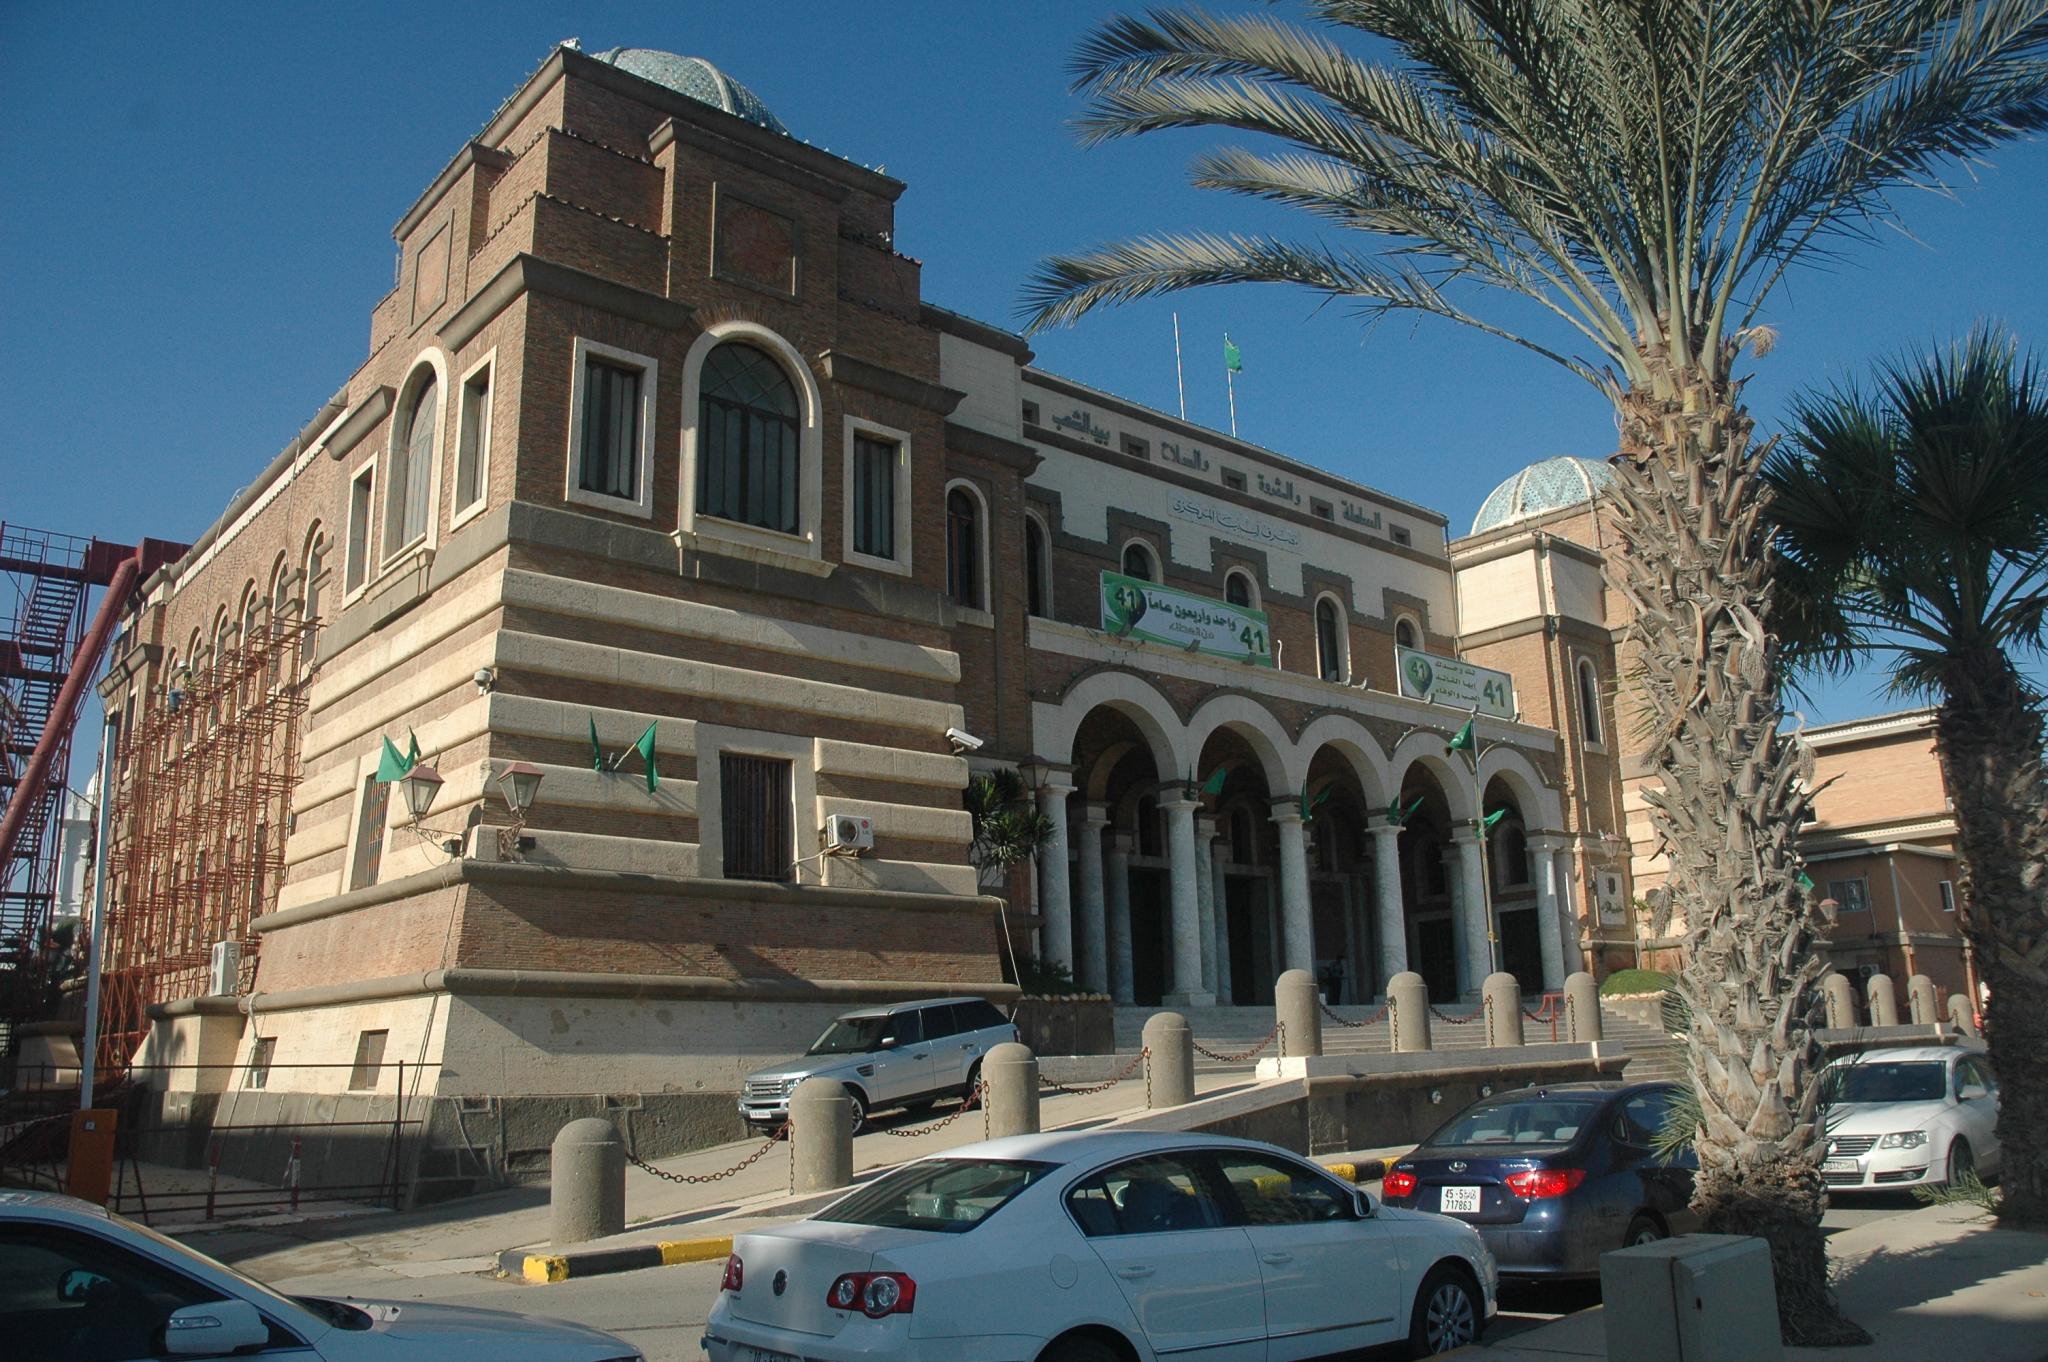 The offices of the Central Bank of Libya in Tripoli on Oct. 18, 2010. Photo by Weisserstier via Flickr, licensed under the terms of Creative Commons 2.0.